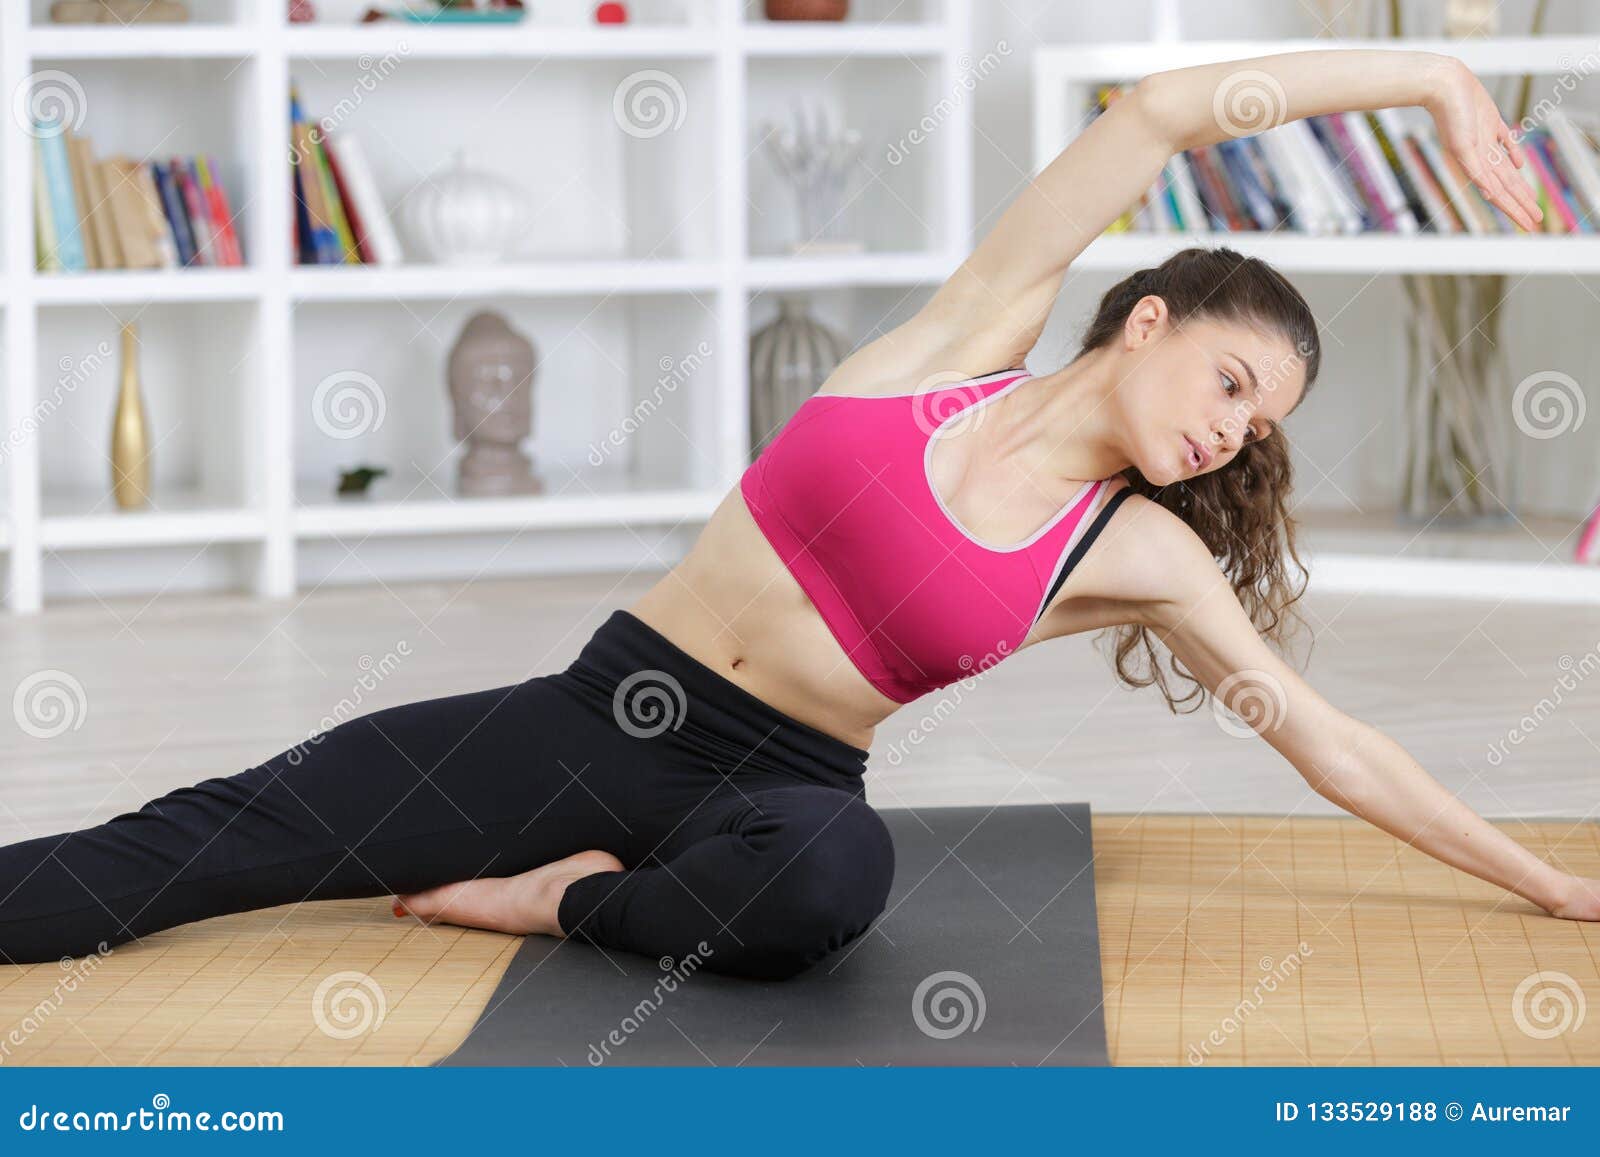 Beautiful Woman Doing Push Up Exercise On Yoga Mat Stock Photo Image Of Strong Strength